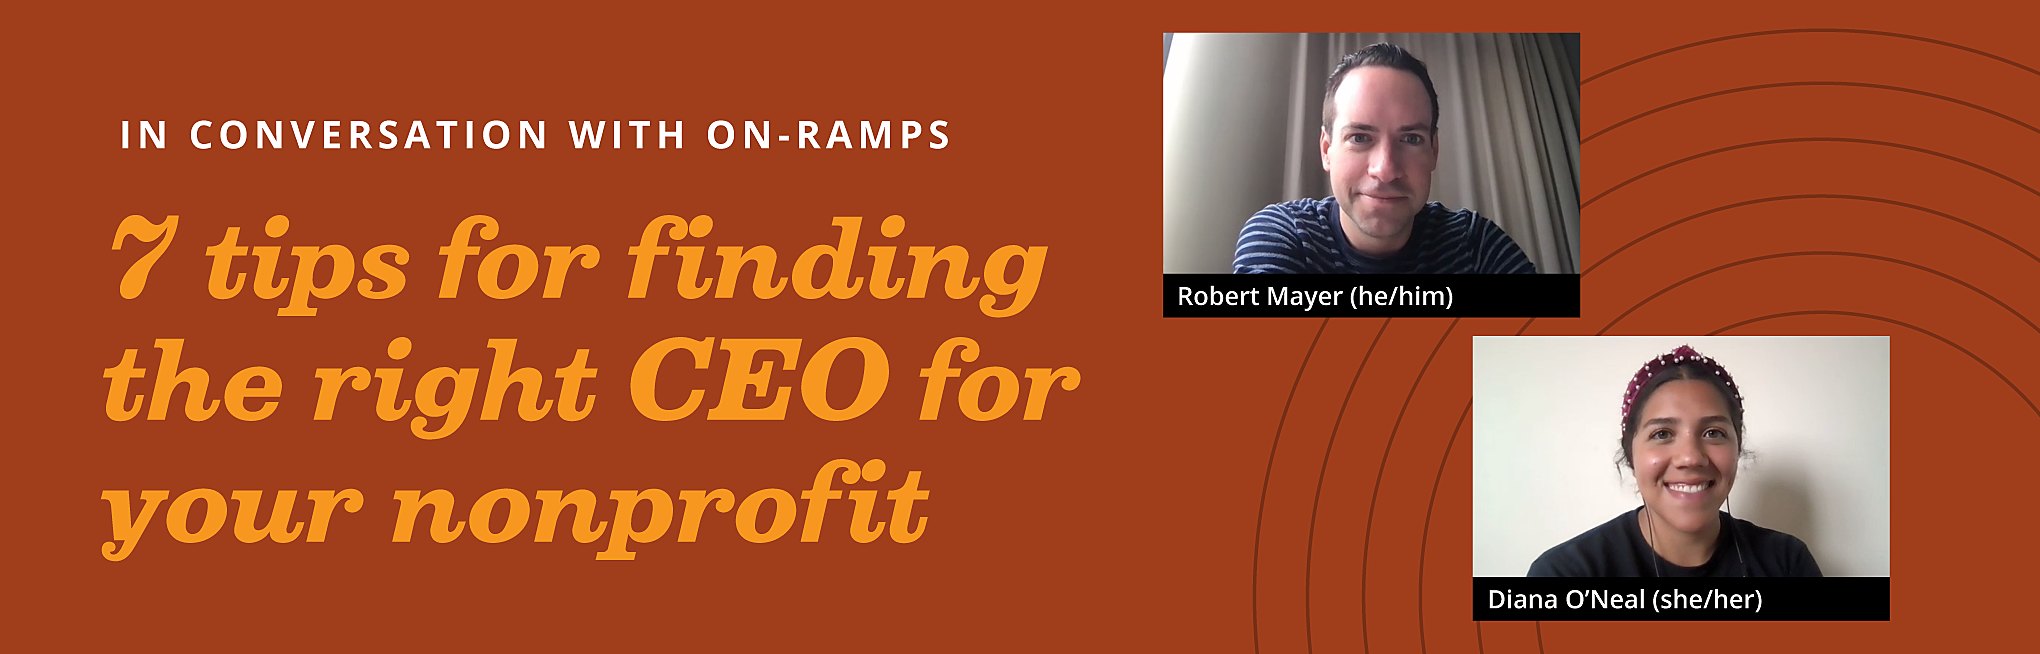 Author's photos with the "7 tips for finding the right CEO for your nonprofit" caption